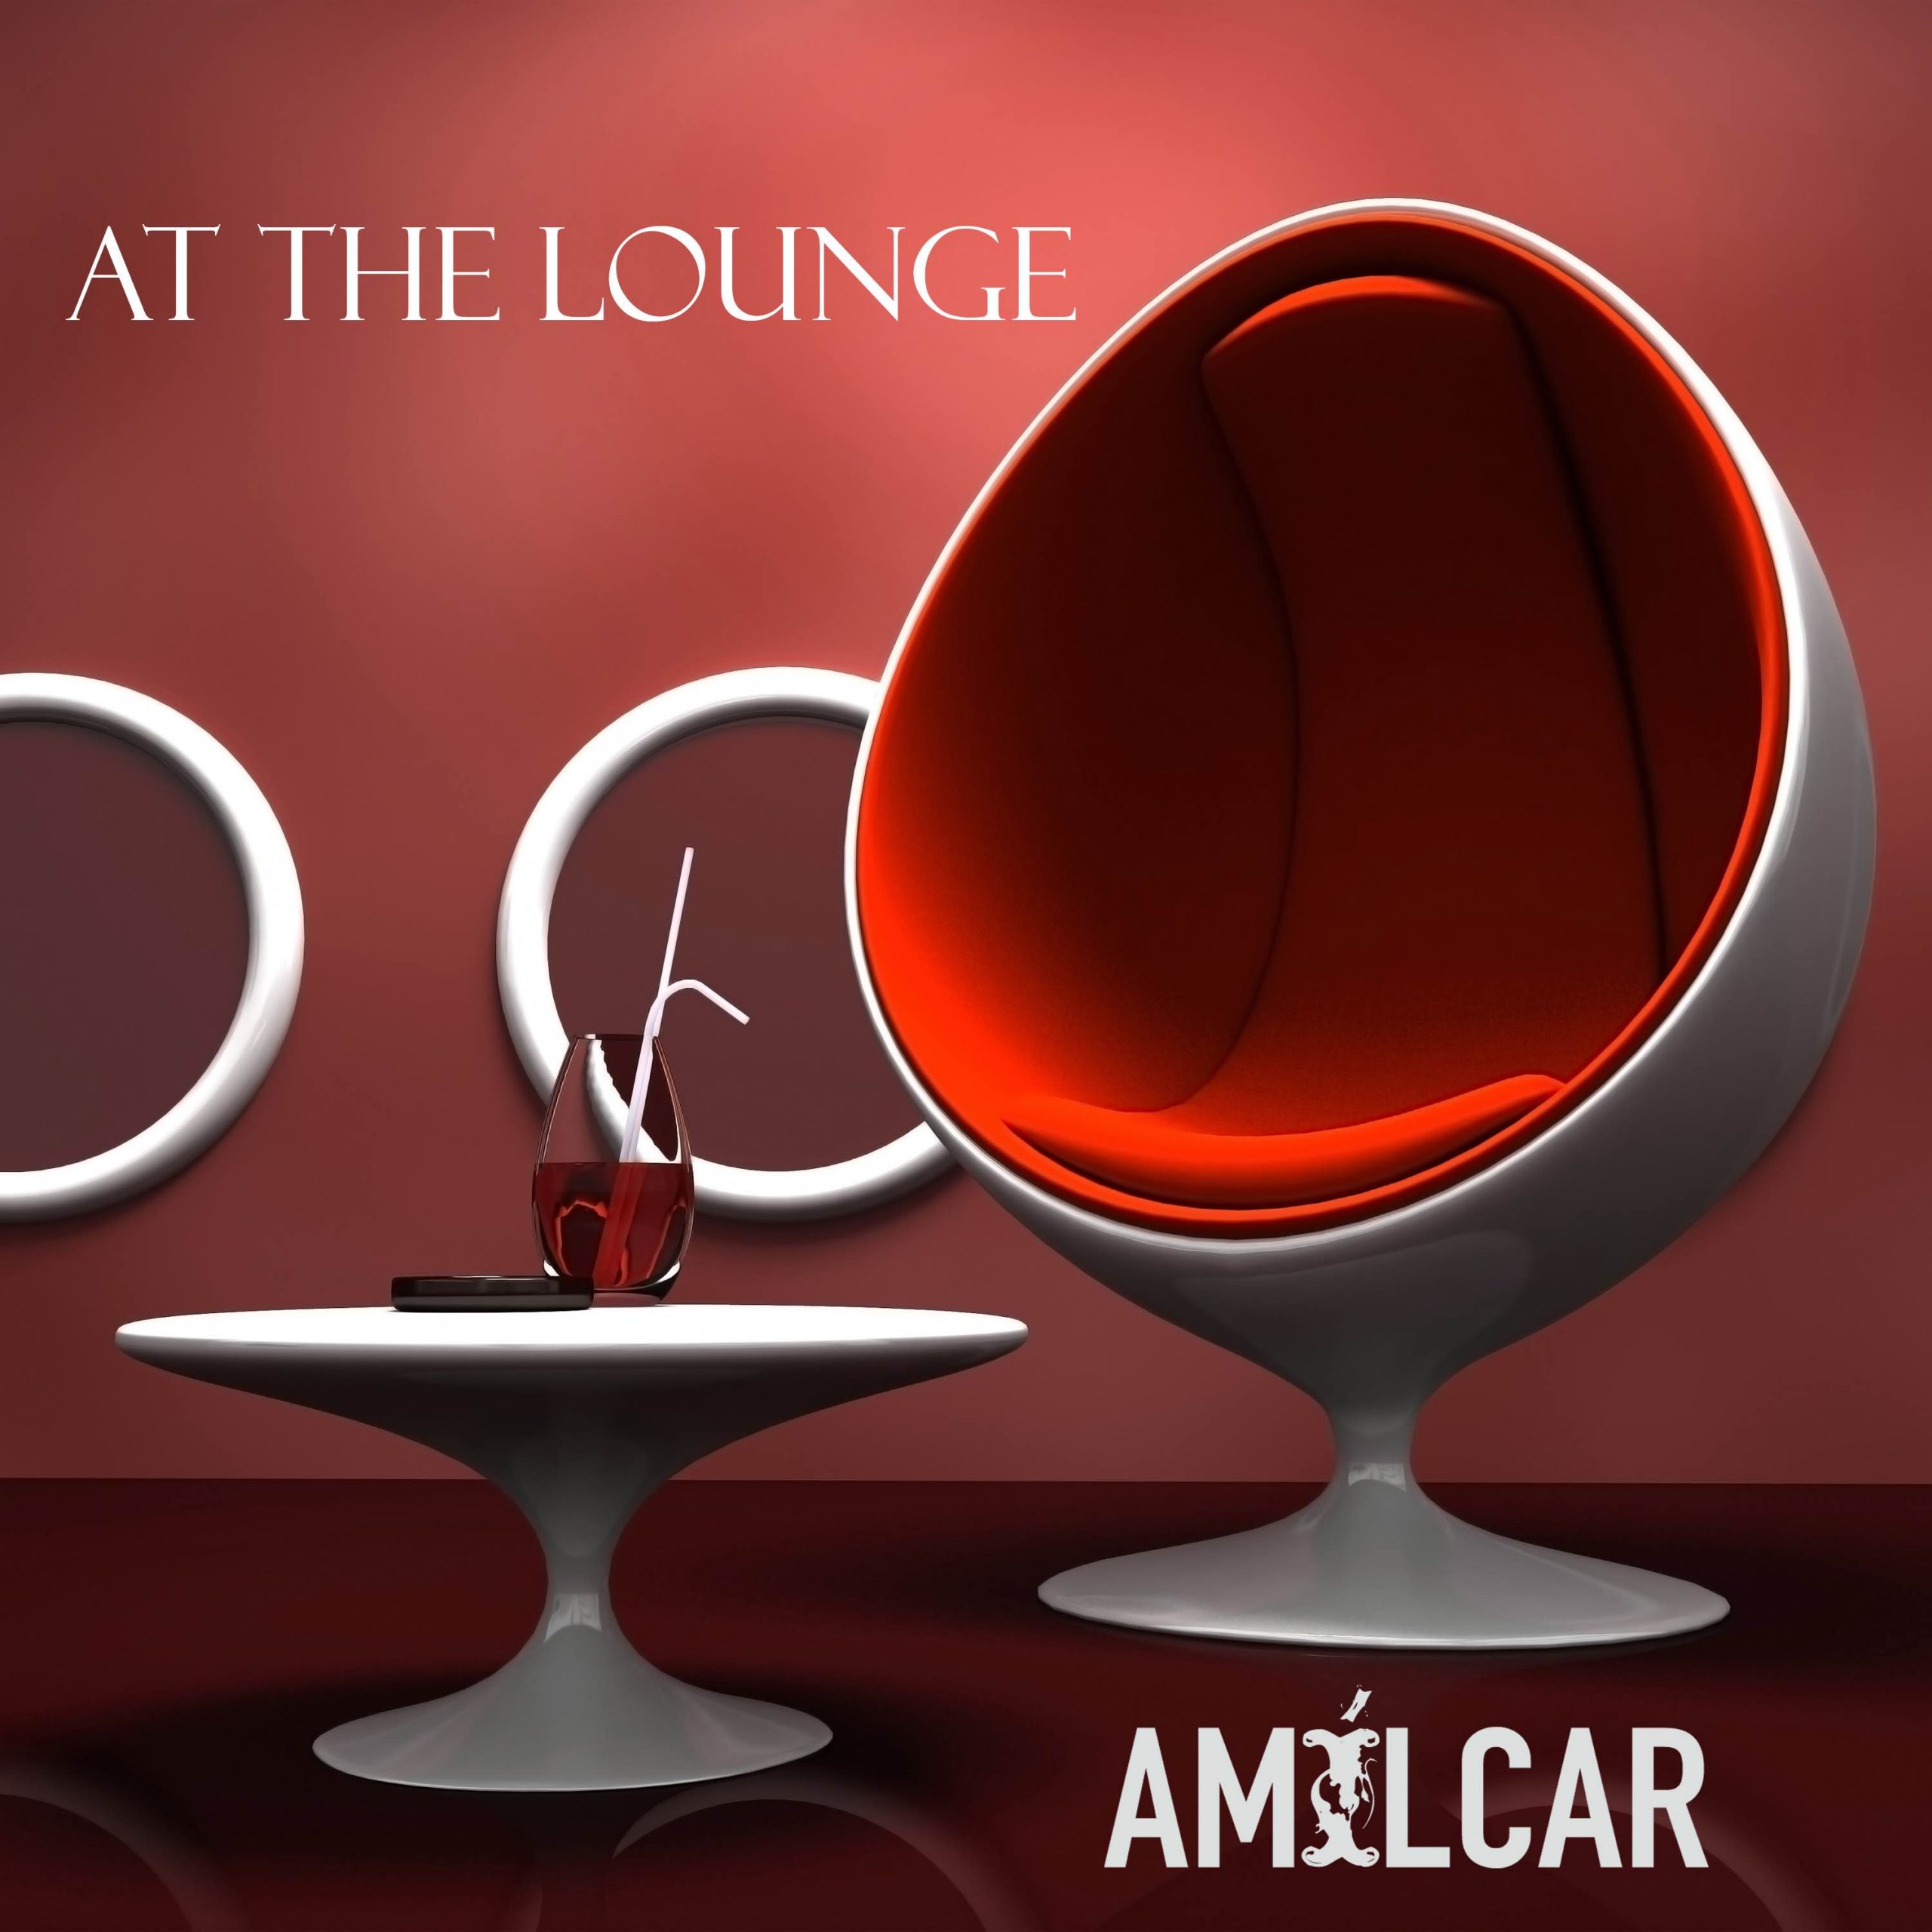 Amilcar Releases "At the Lounge" with a Unique Fresh Lounge Style